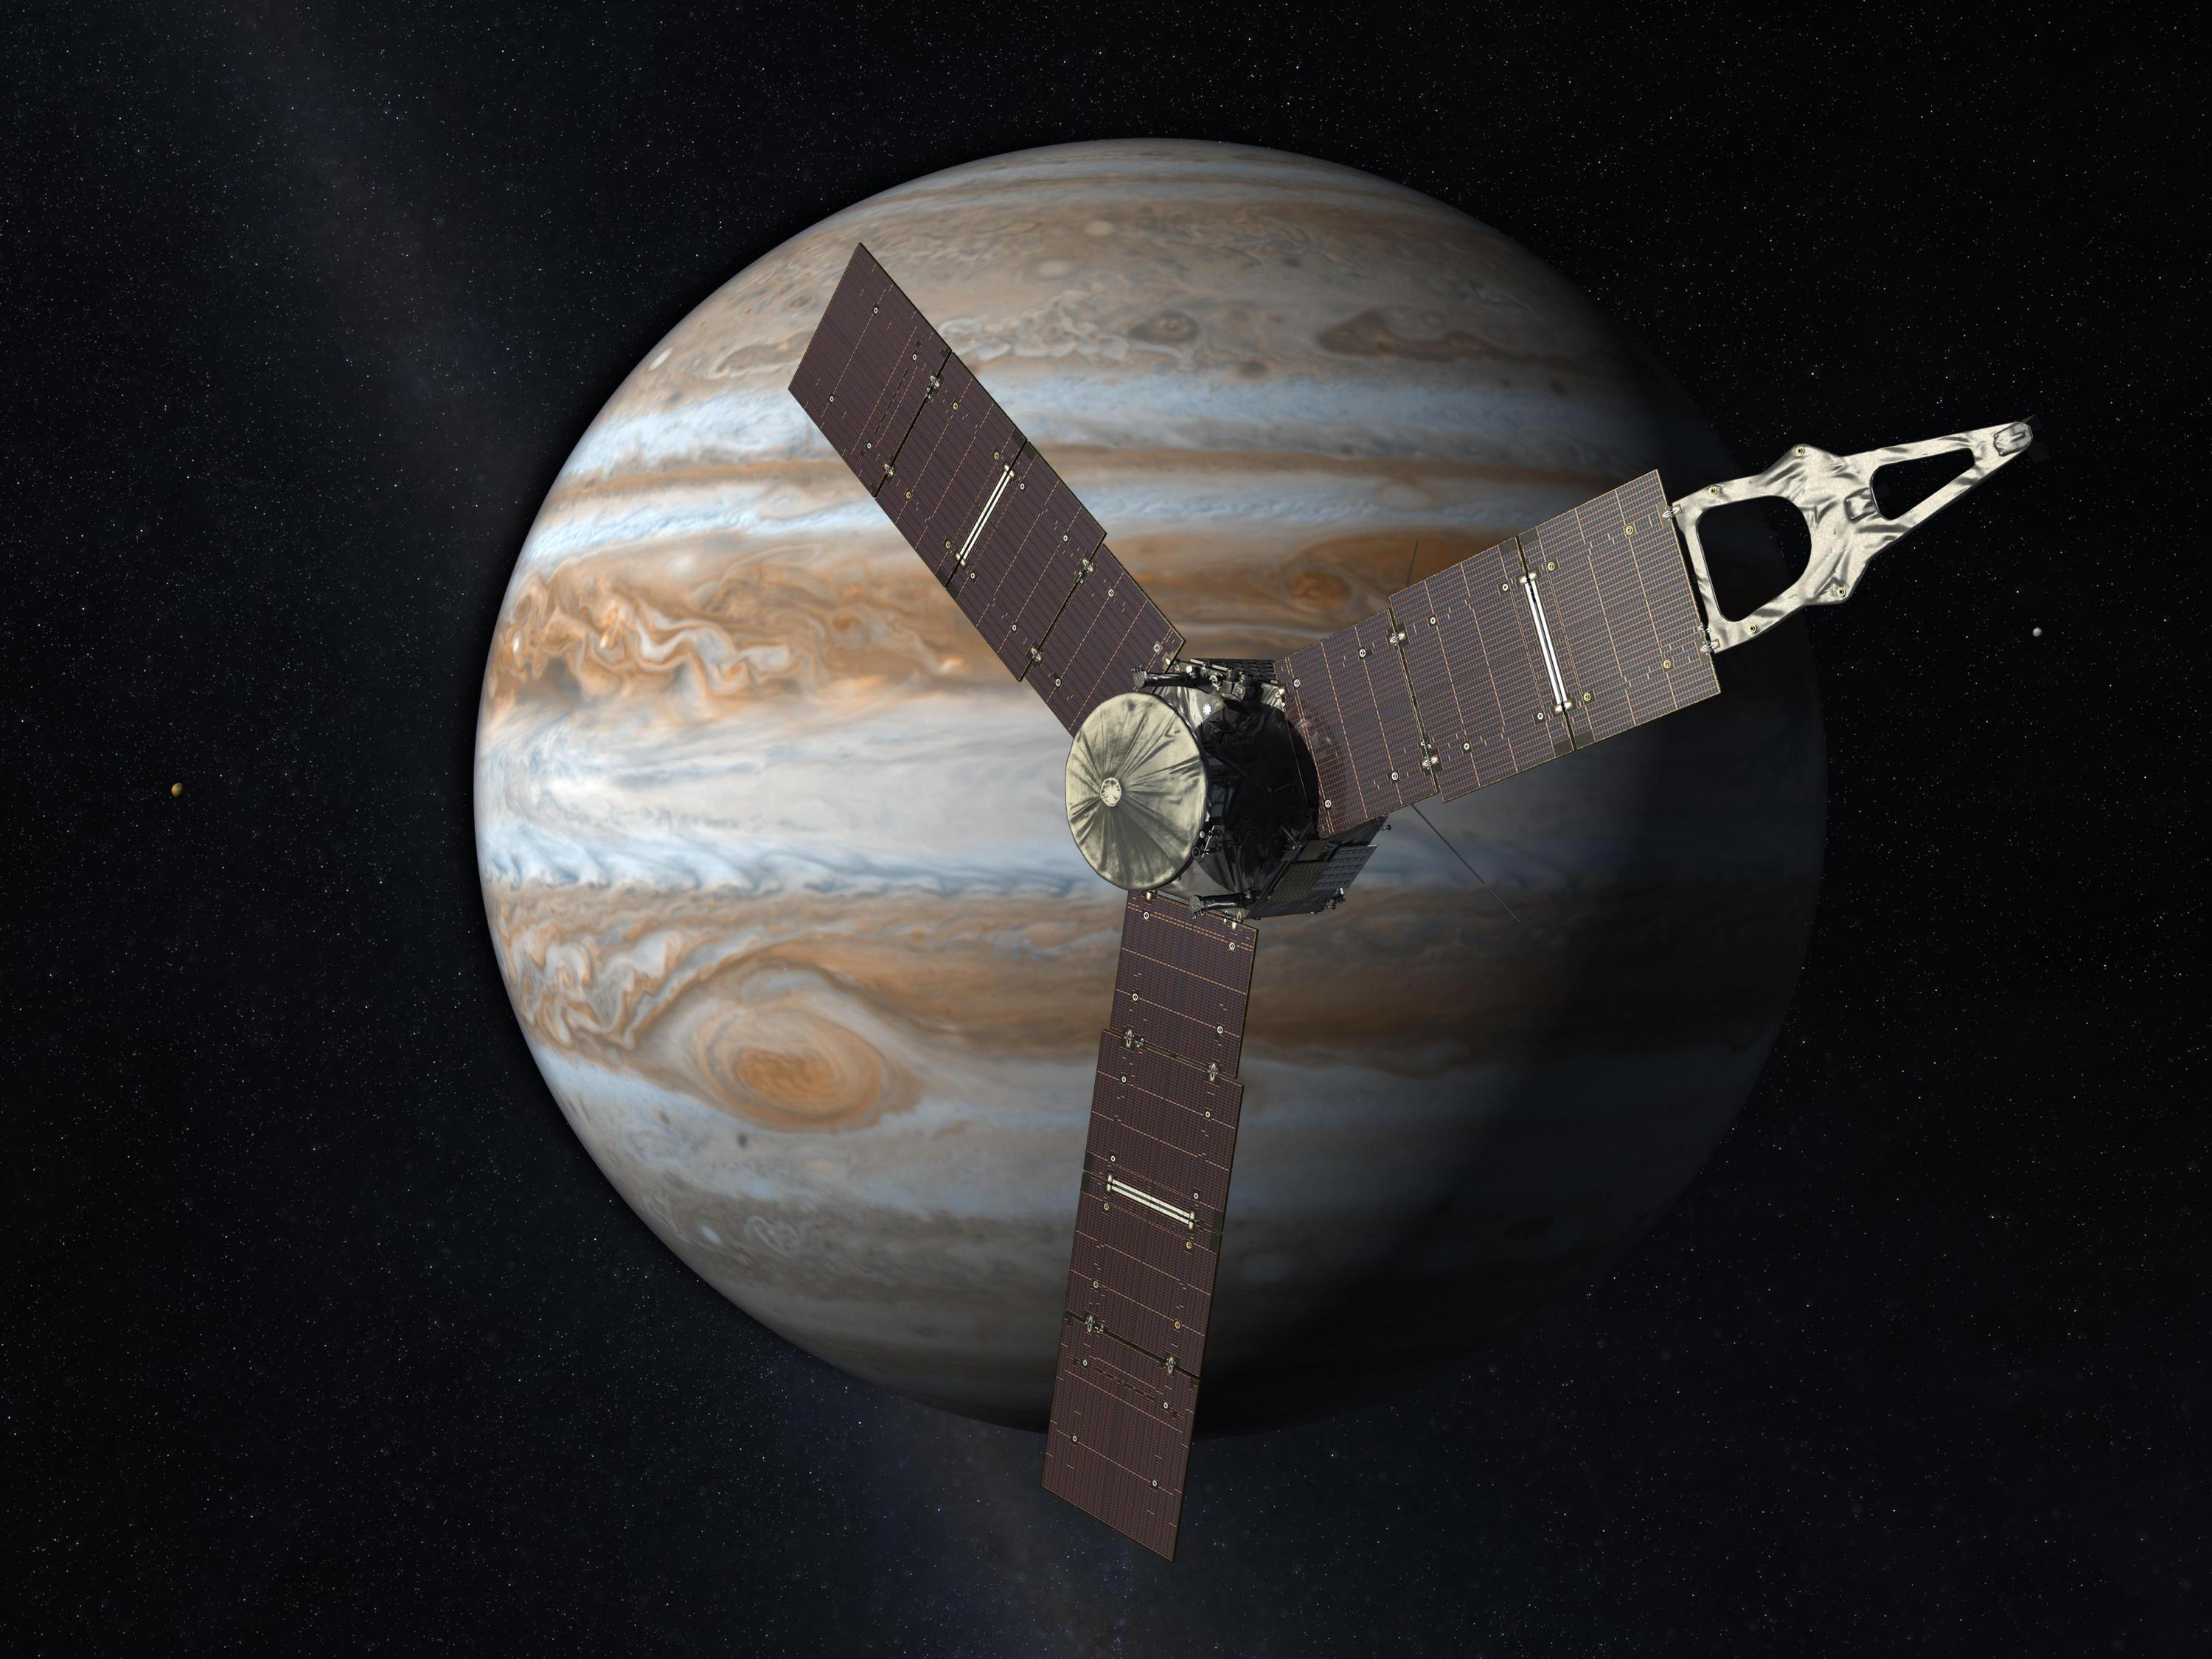 The Juno spacecraft arrived in the Jovian system in 2016. (Illustration NASA)